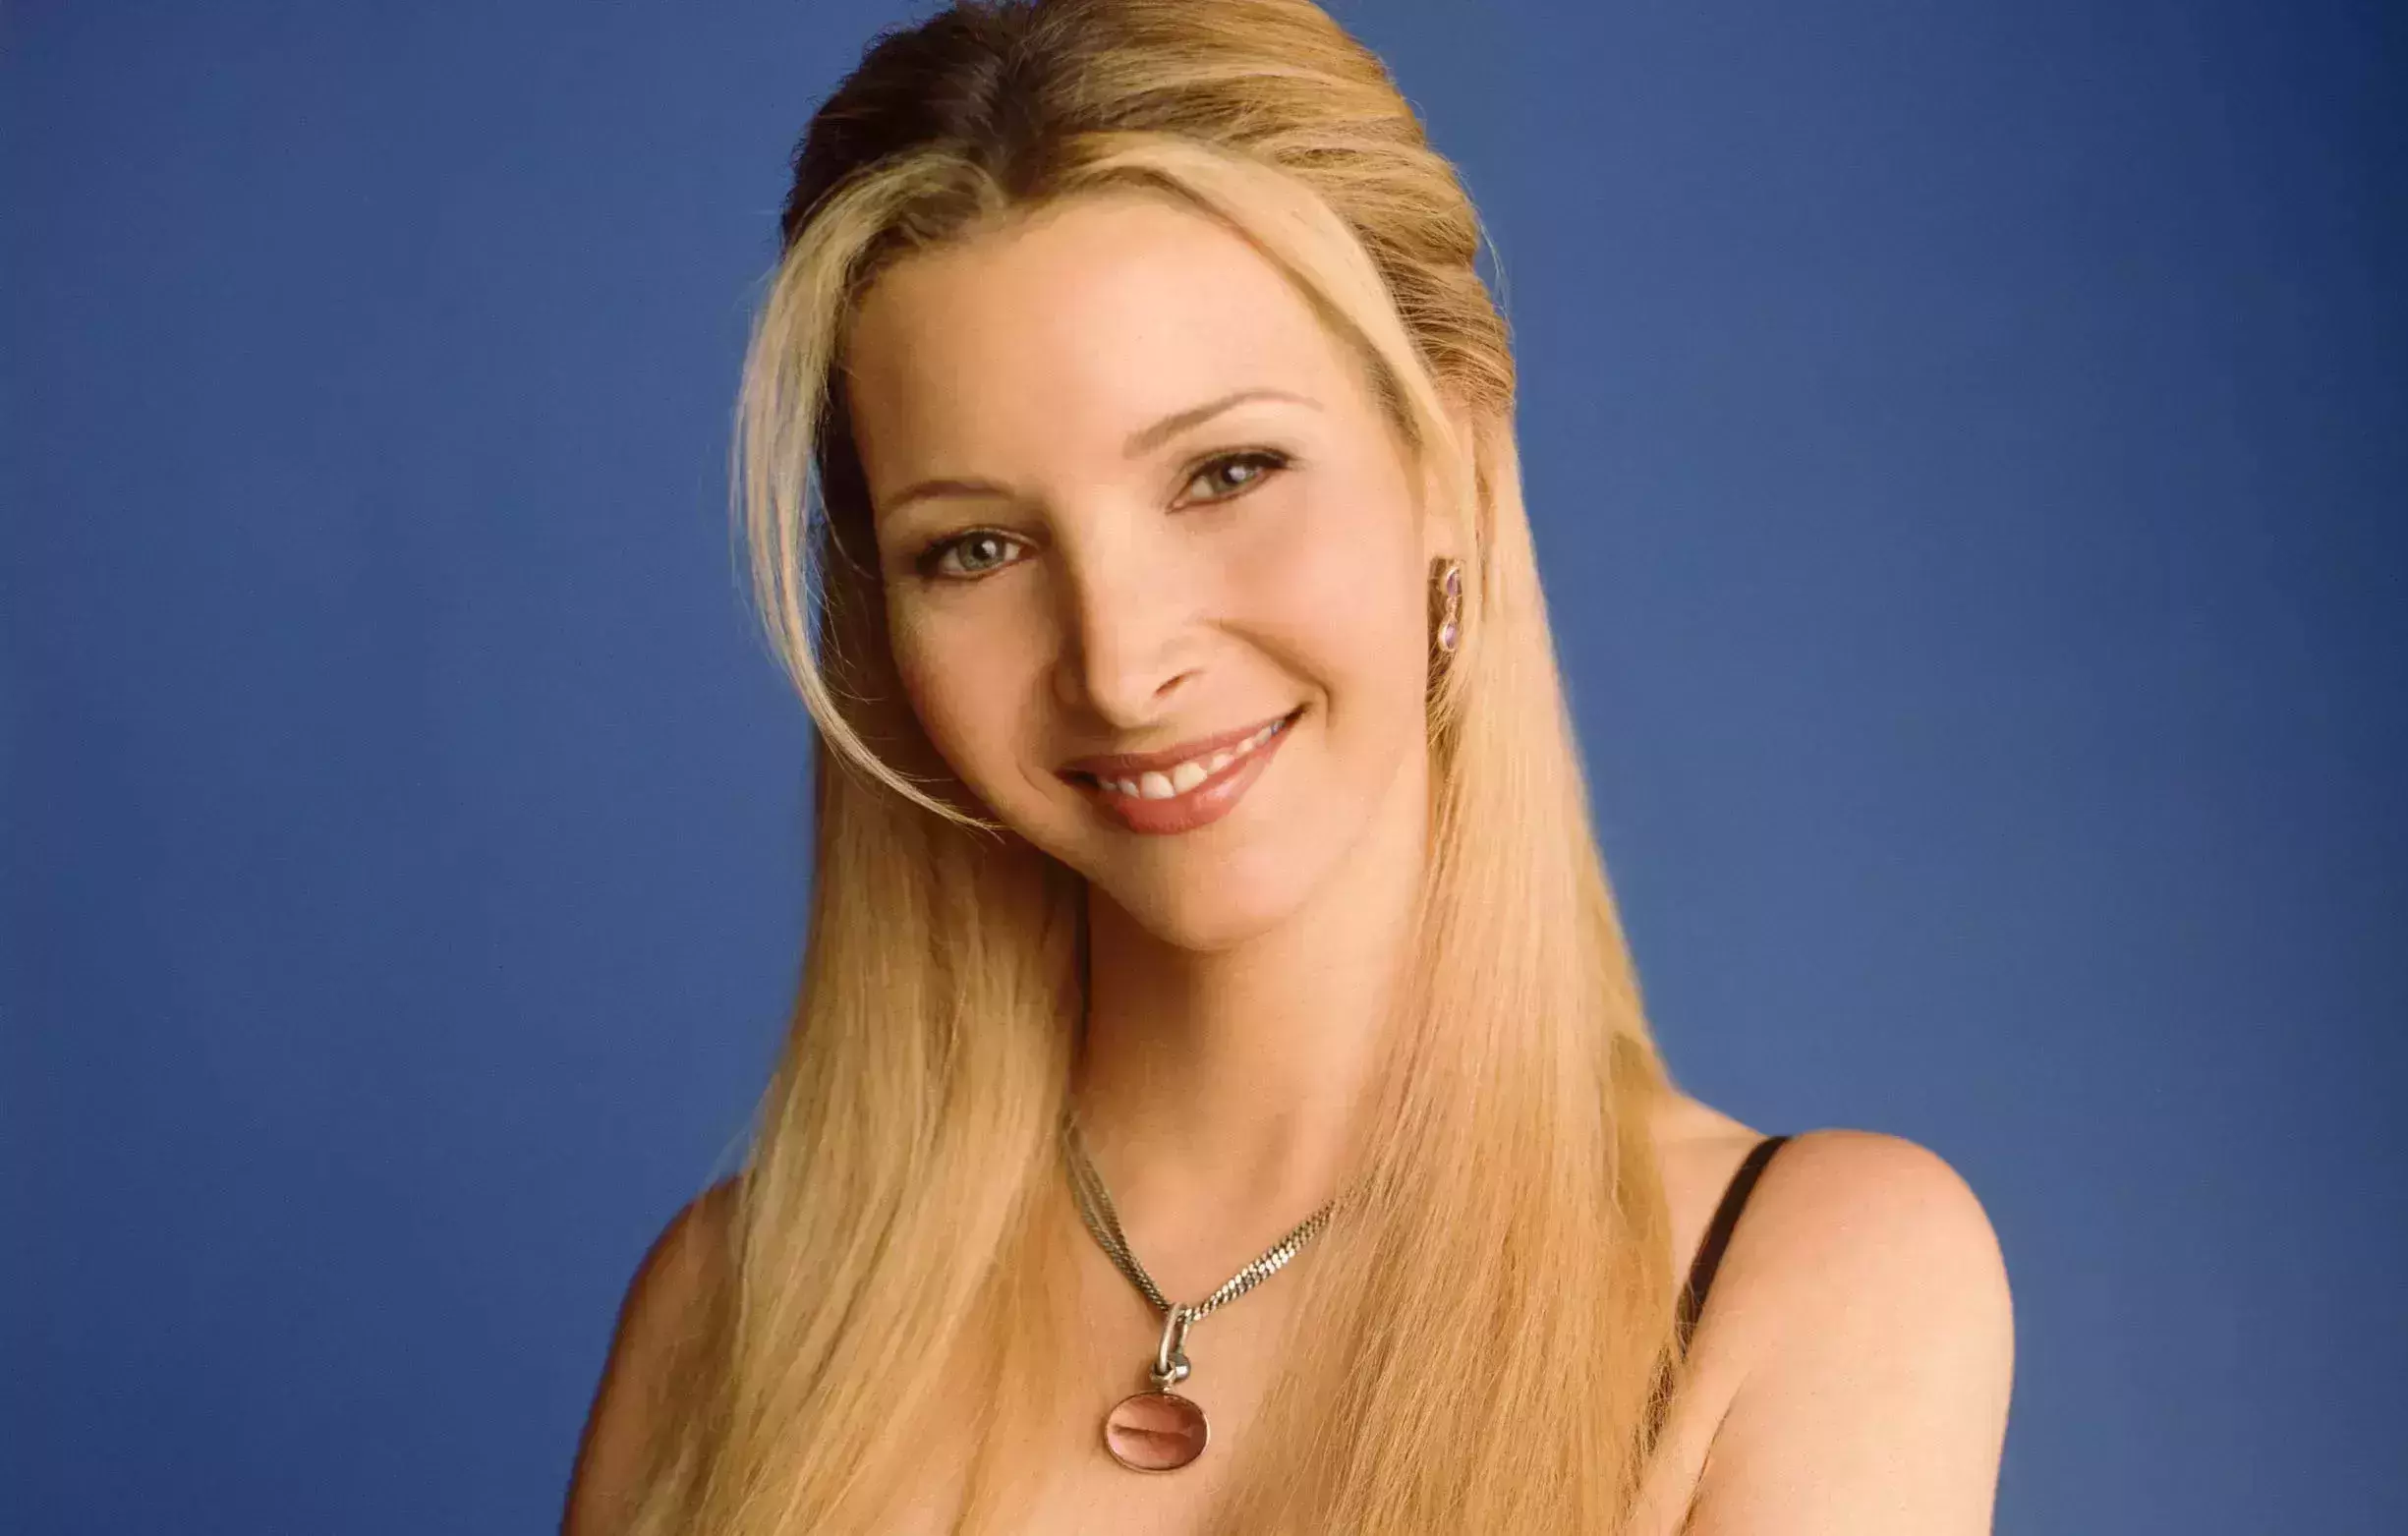 Friends fame Lisa Kudrow opens up about insecurities and body dysmorphia